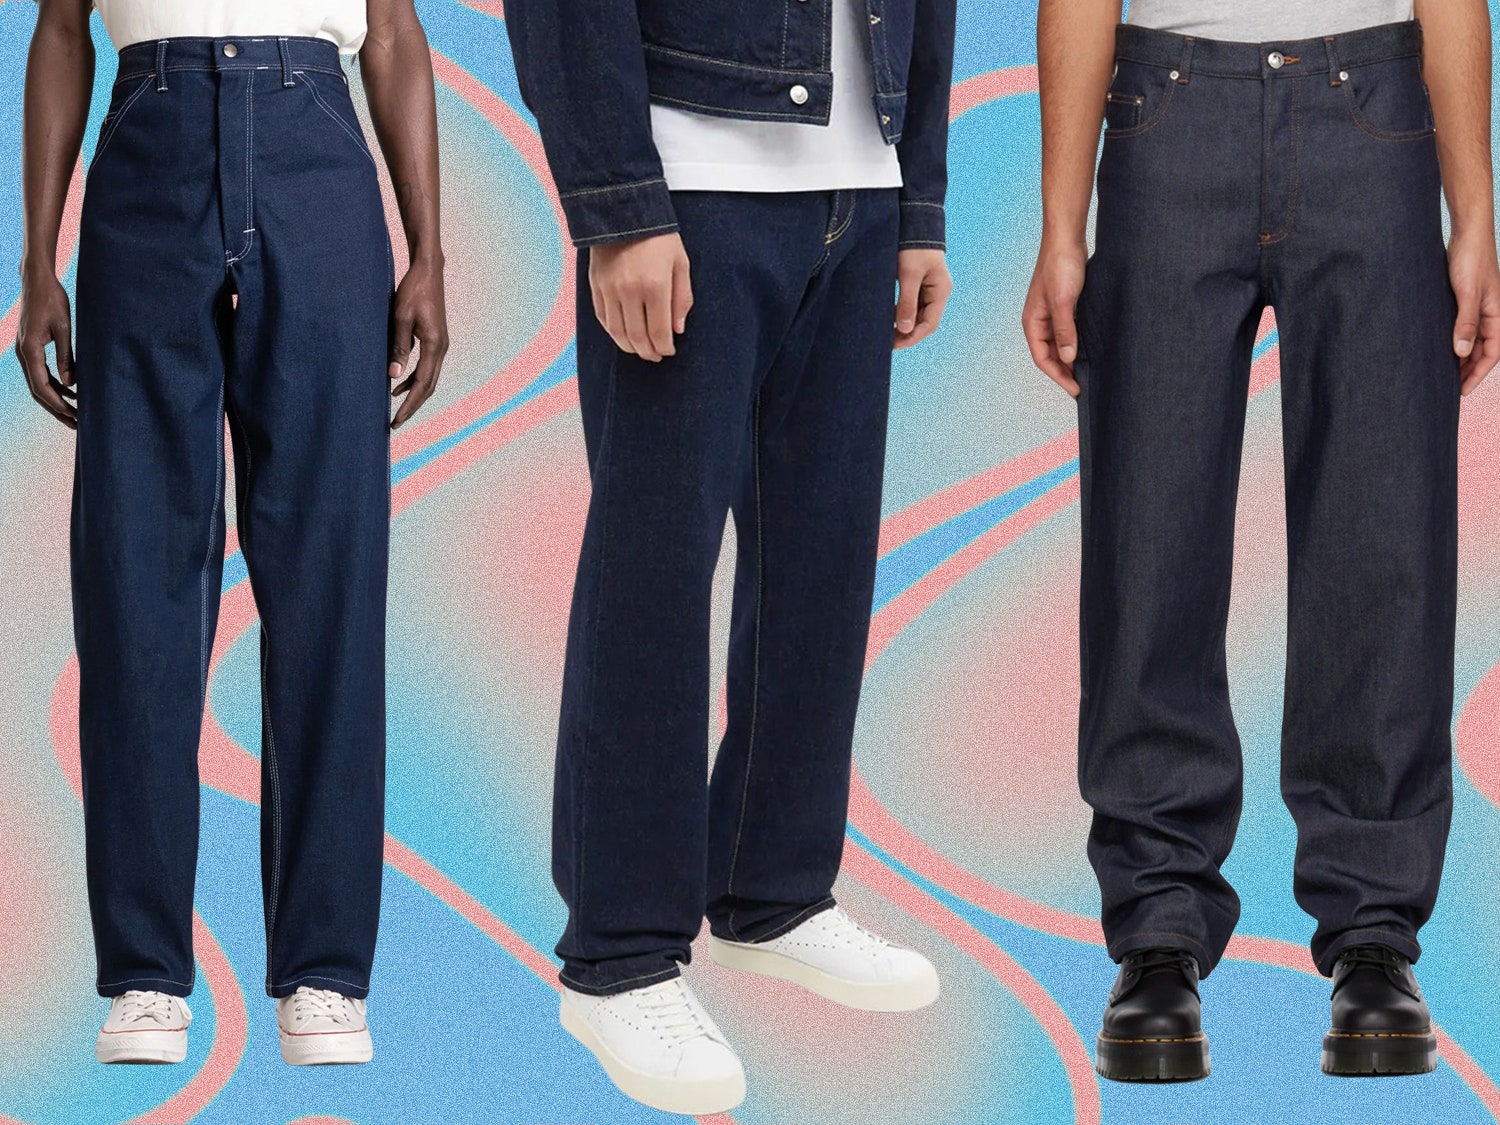 Ready Your Thighs for the Raw Denim Resurgence